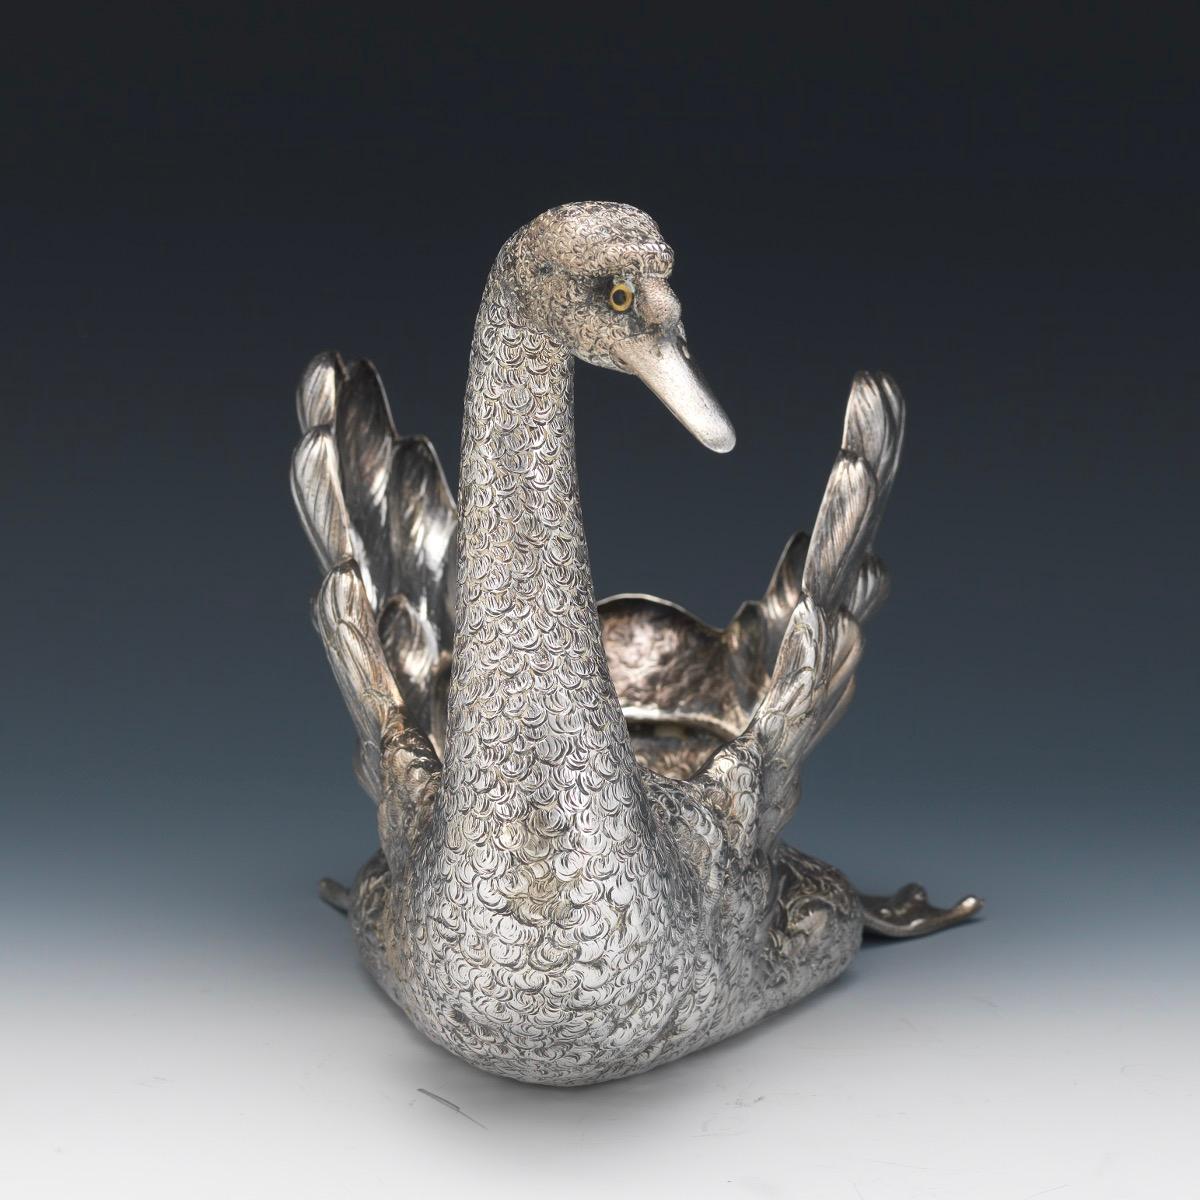 Buccellati Italy, a large sterling silver swan centerpiece 

A large sterling silver swimming swan centerpiece bowl with textured finish, with scrolled neck and head and glass eyes. 

Textured feathers beautifully delineated. Marked Buccellati,